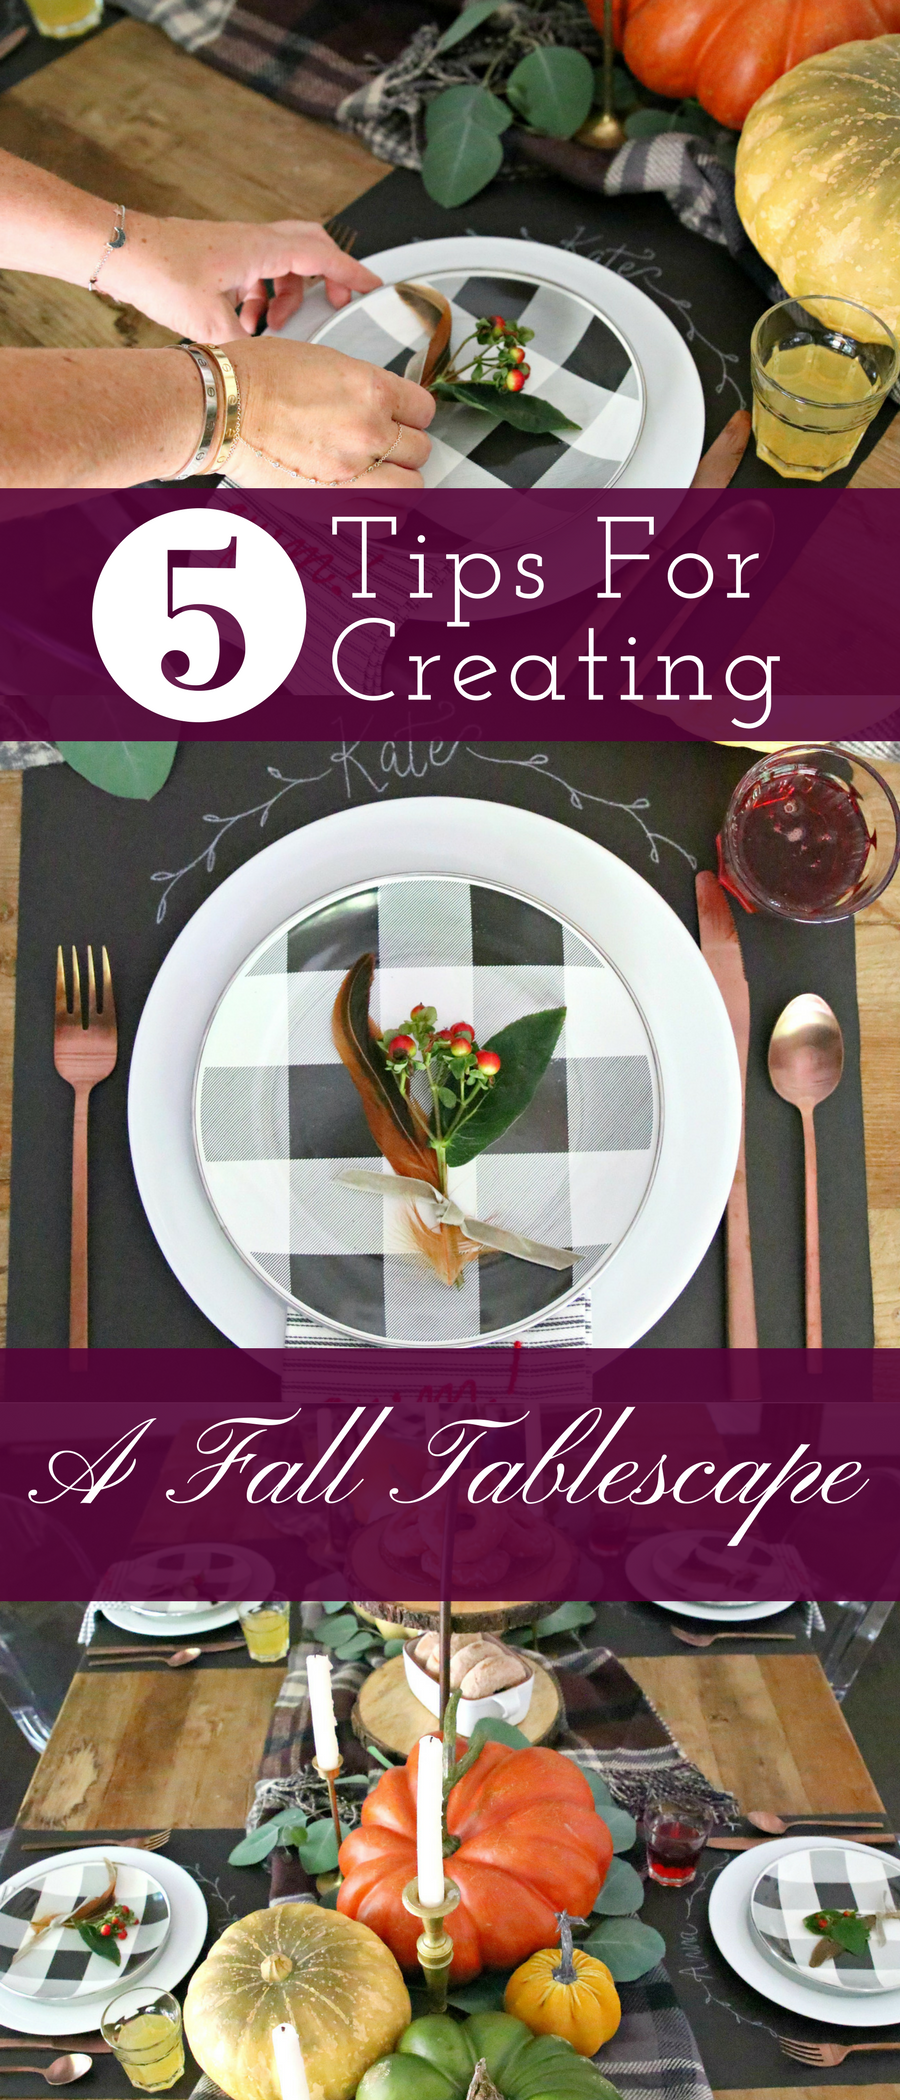 5 Tips For Creating a Fall Tablescape